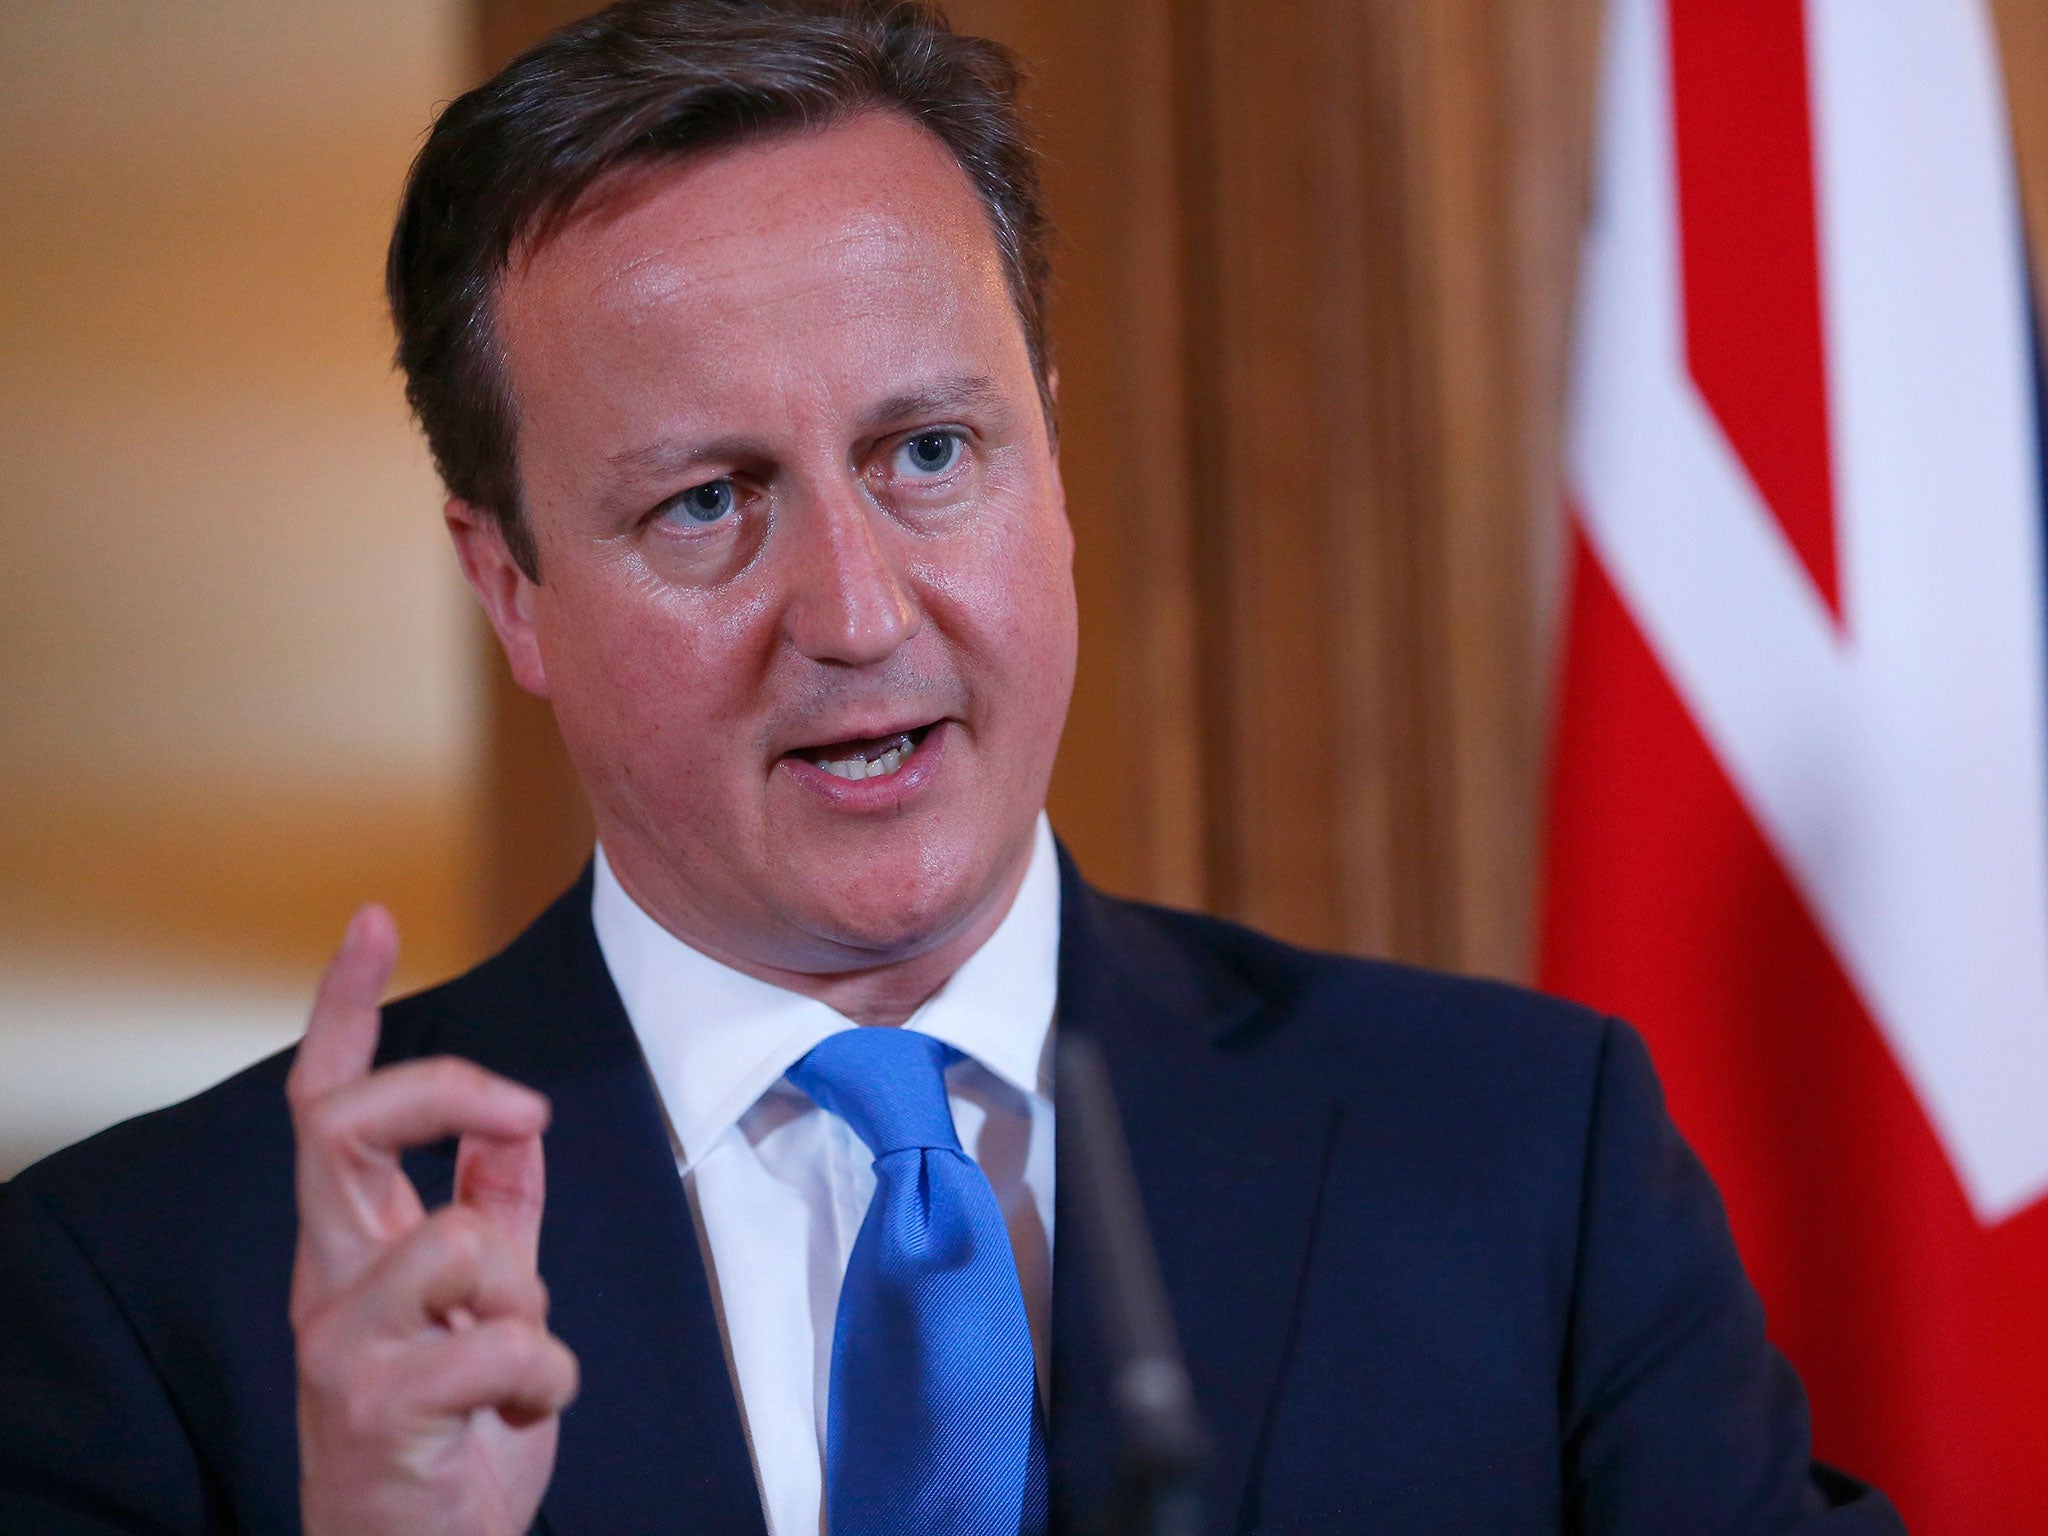 David Cameron has been accused of 'inserting a private part of his anatomy' into a dead pig's mouth